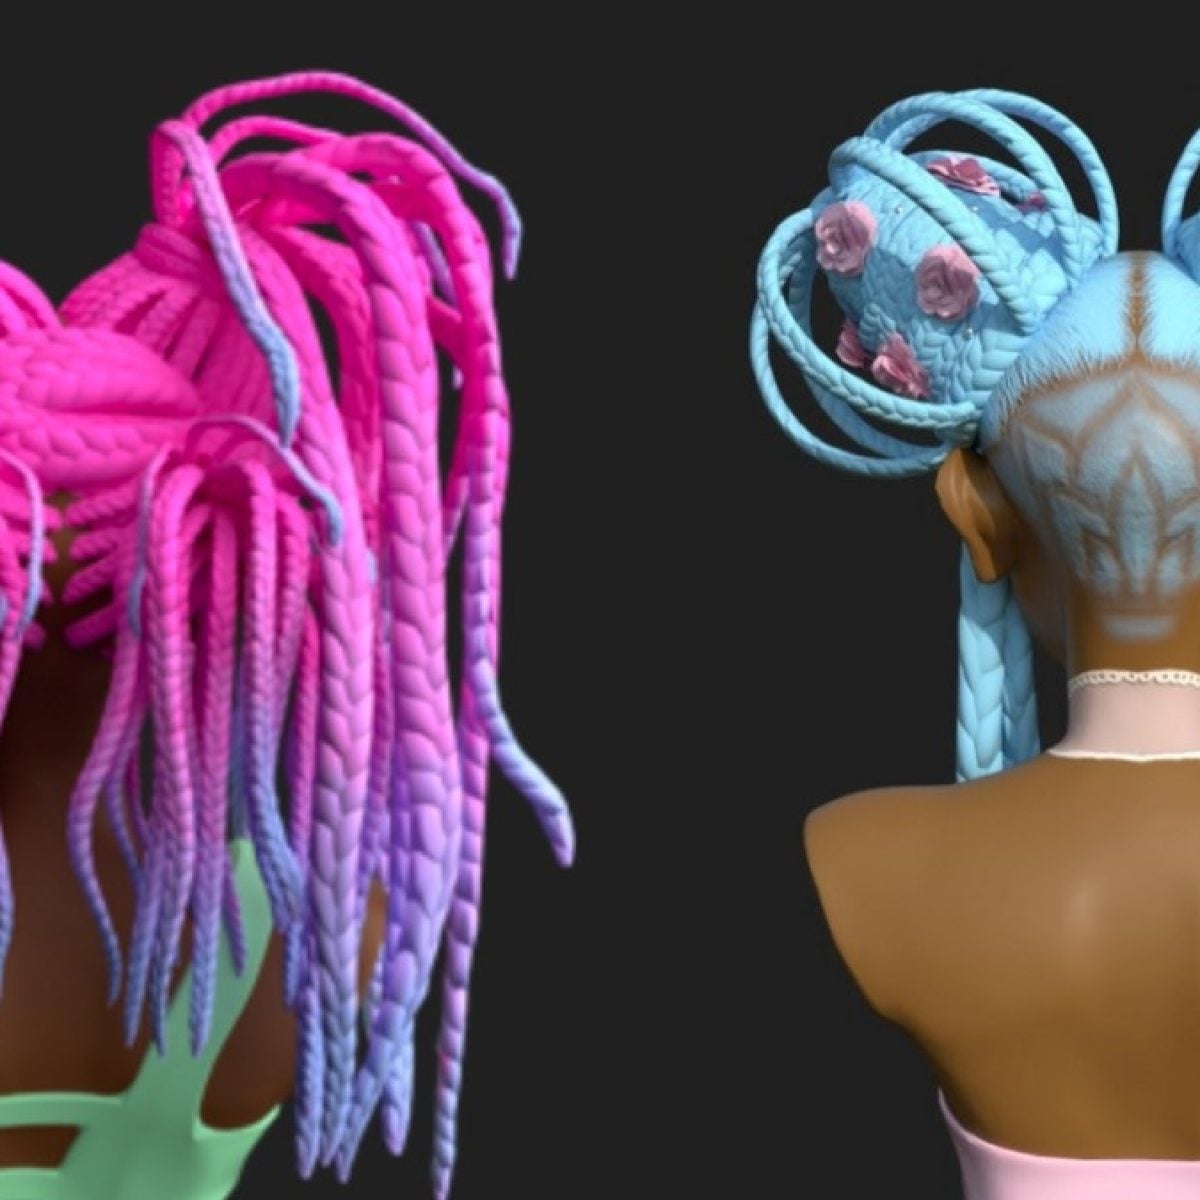 Gamers, Black Hairstyles Are Set To Get A Much-Needed Makeover In 2023